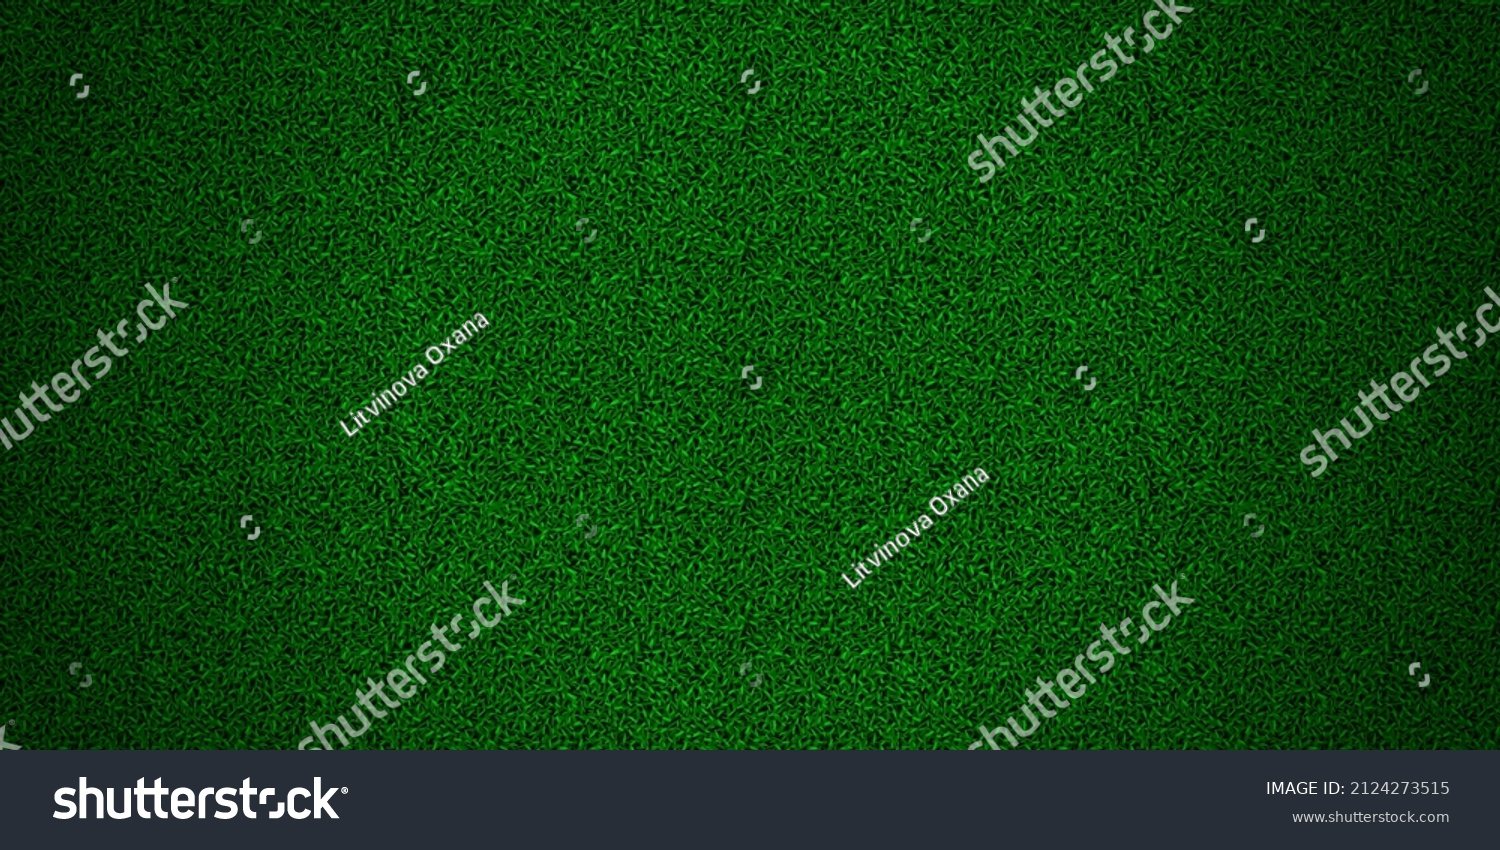 Green field with astro turf grass texture seamless pattern. Carpet or lawn top view. Vector background. Baseball, soccer, football or golf game. Fake plastic or fresh natural ground for game play. #2124273515